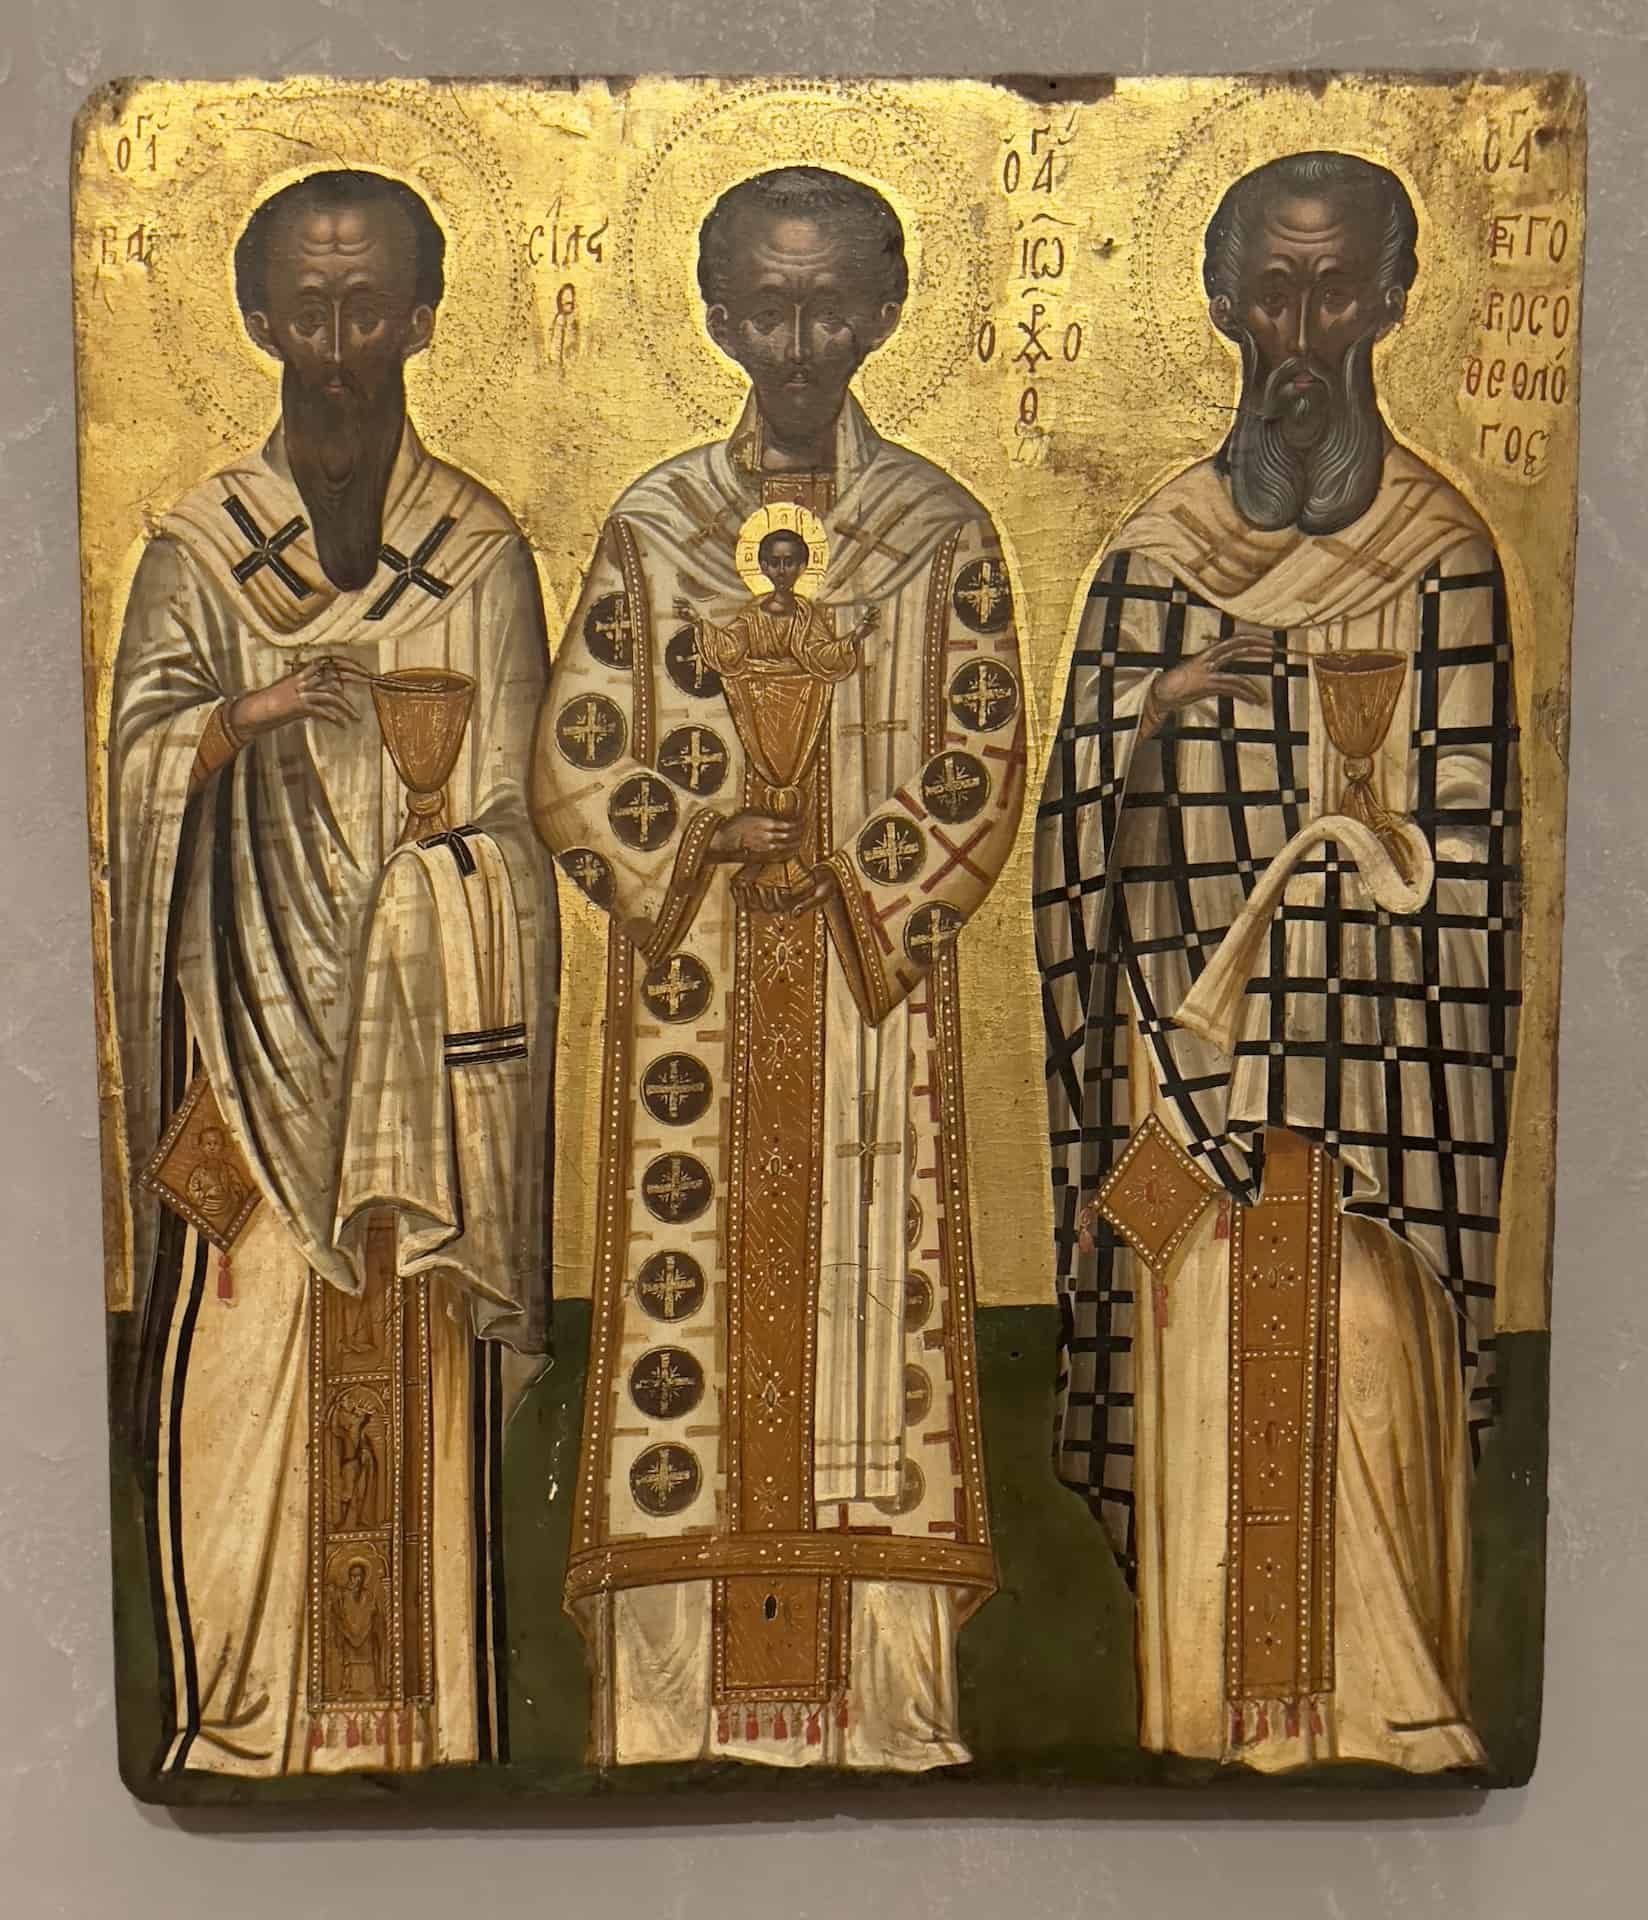 Icon with a depiction of the Three Hierarchs and a Holy Communion chalice, from the Church of Saint Gerasimos in Argostoli, 18th century at the Byzantine Museum in Athens, Greece